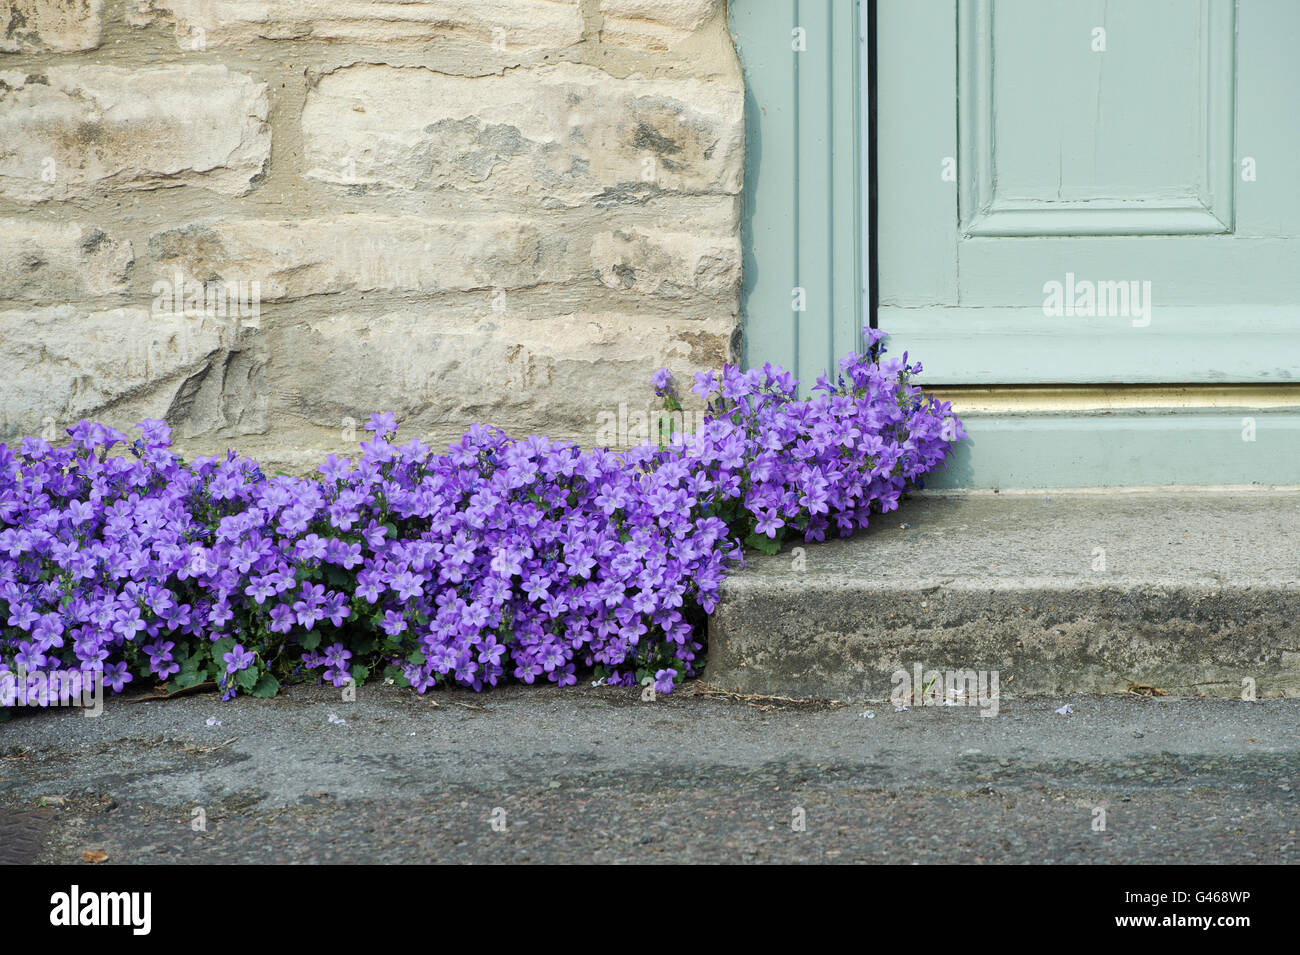 Campanula Portenschlagiana. Wall bellflower growing on a house doorstep. Oxfordshire, England Stock Photo